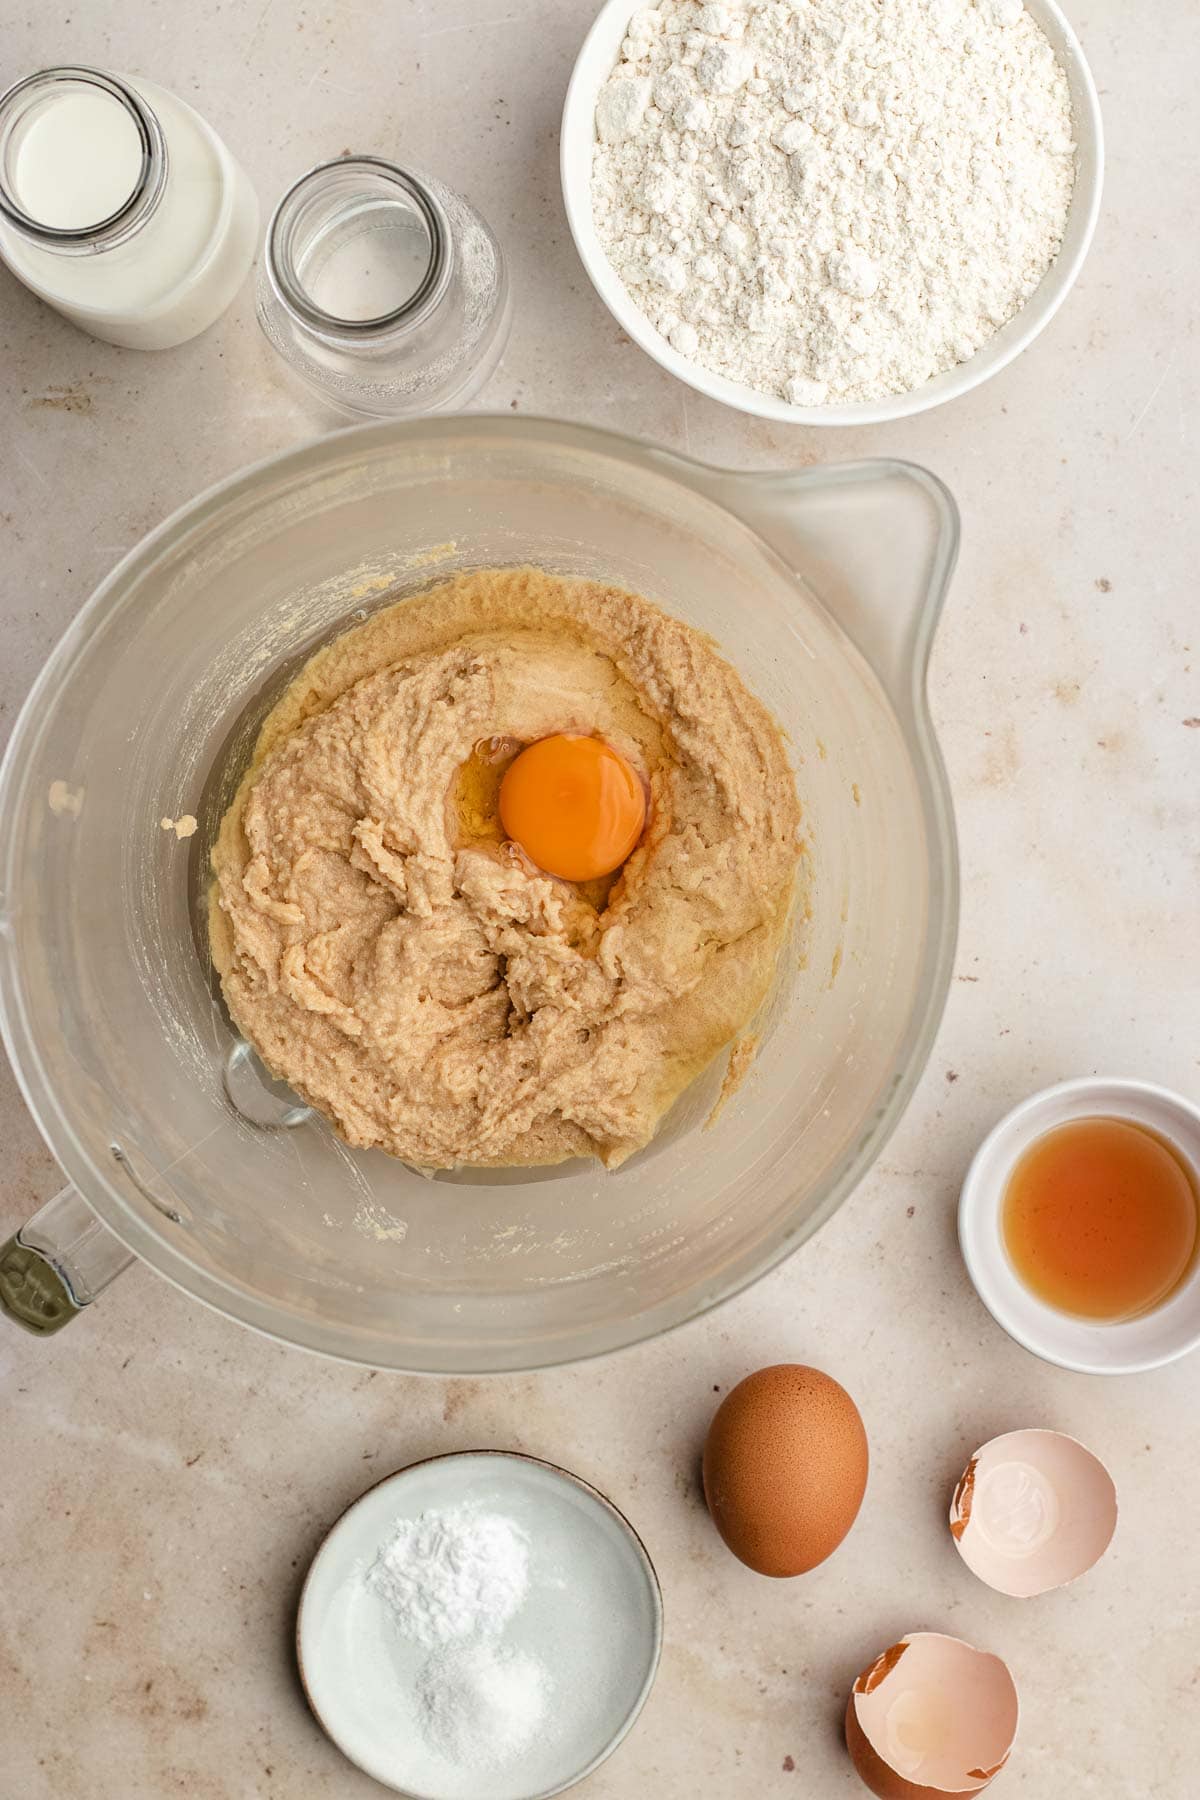 Peanut Butter Layer Cake adding eggs to mixing bowl